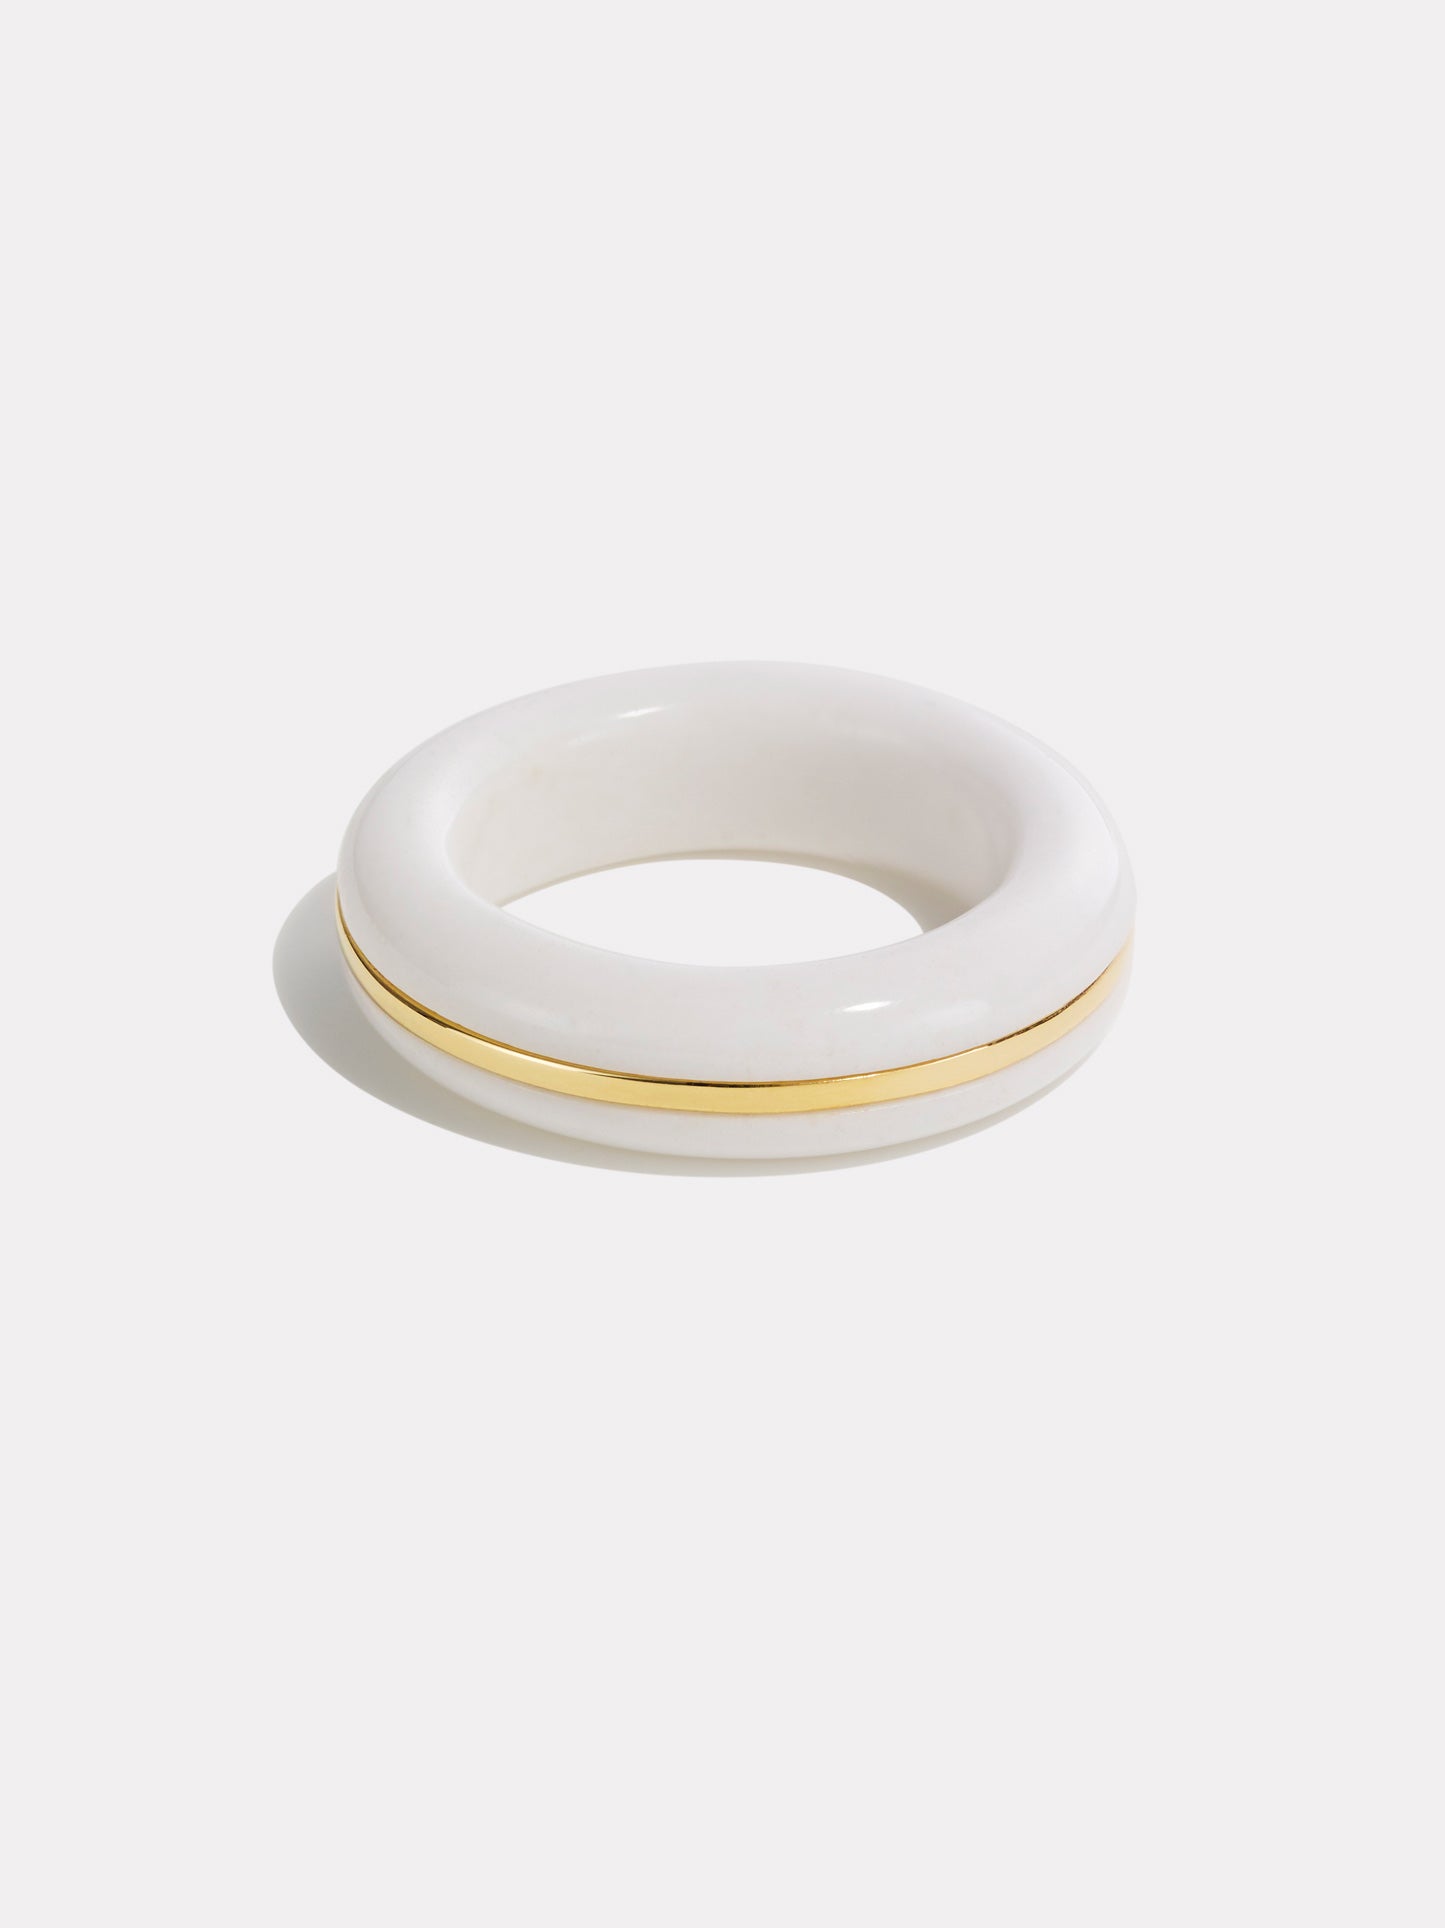 Essential Gem Stacking Ring - White Agate